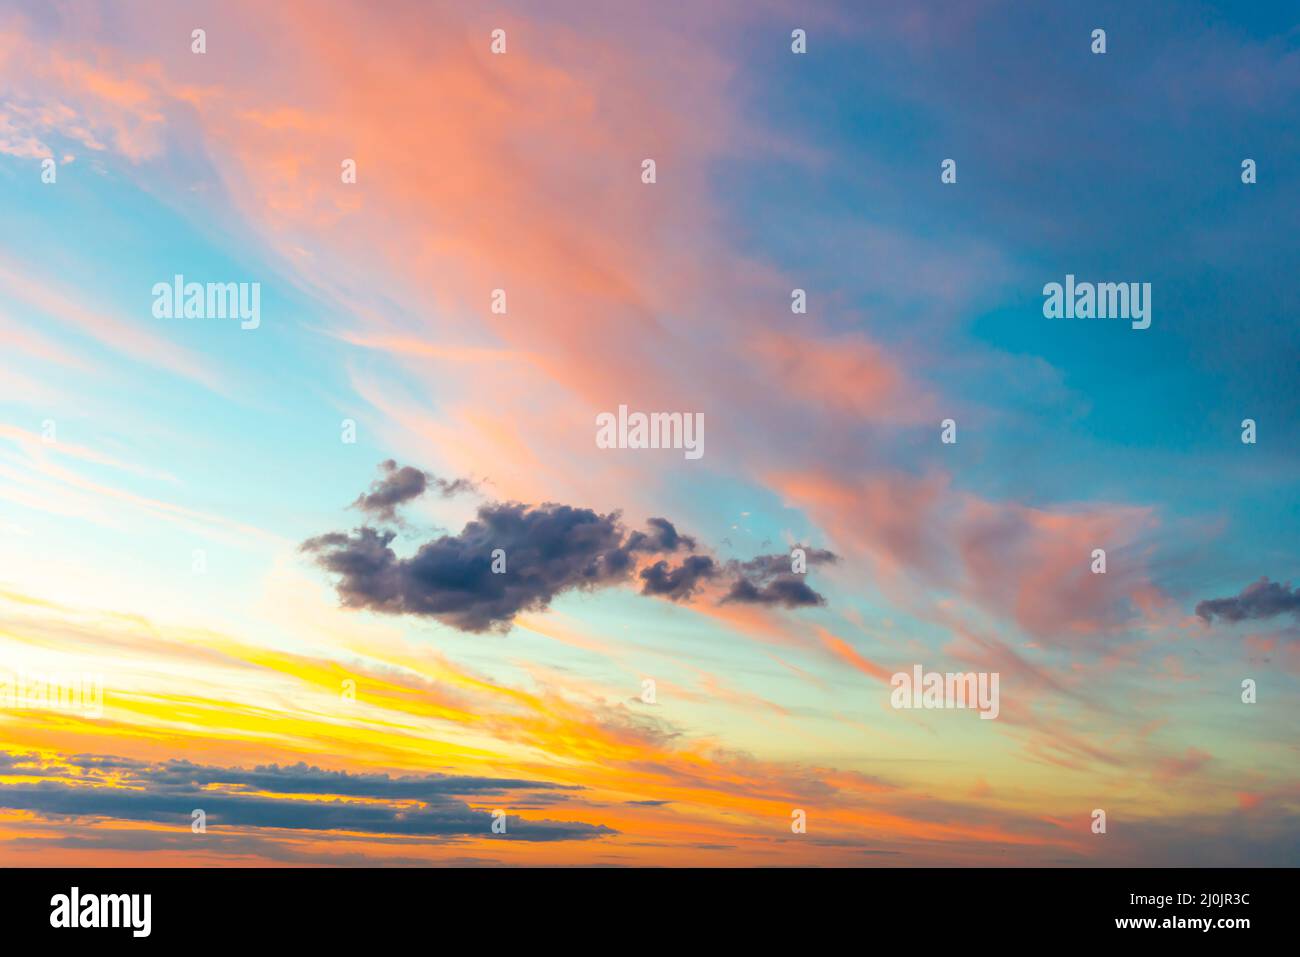 Sunset sky with sunset clouds Stock Photo